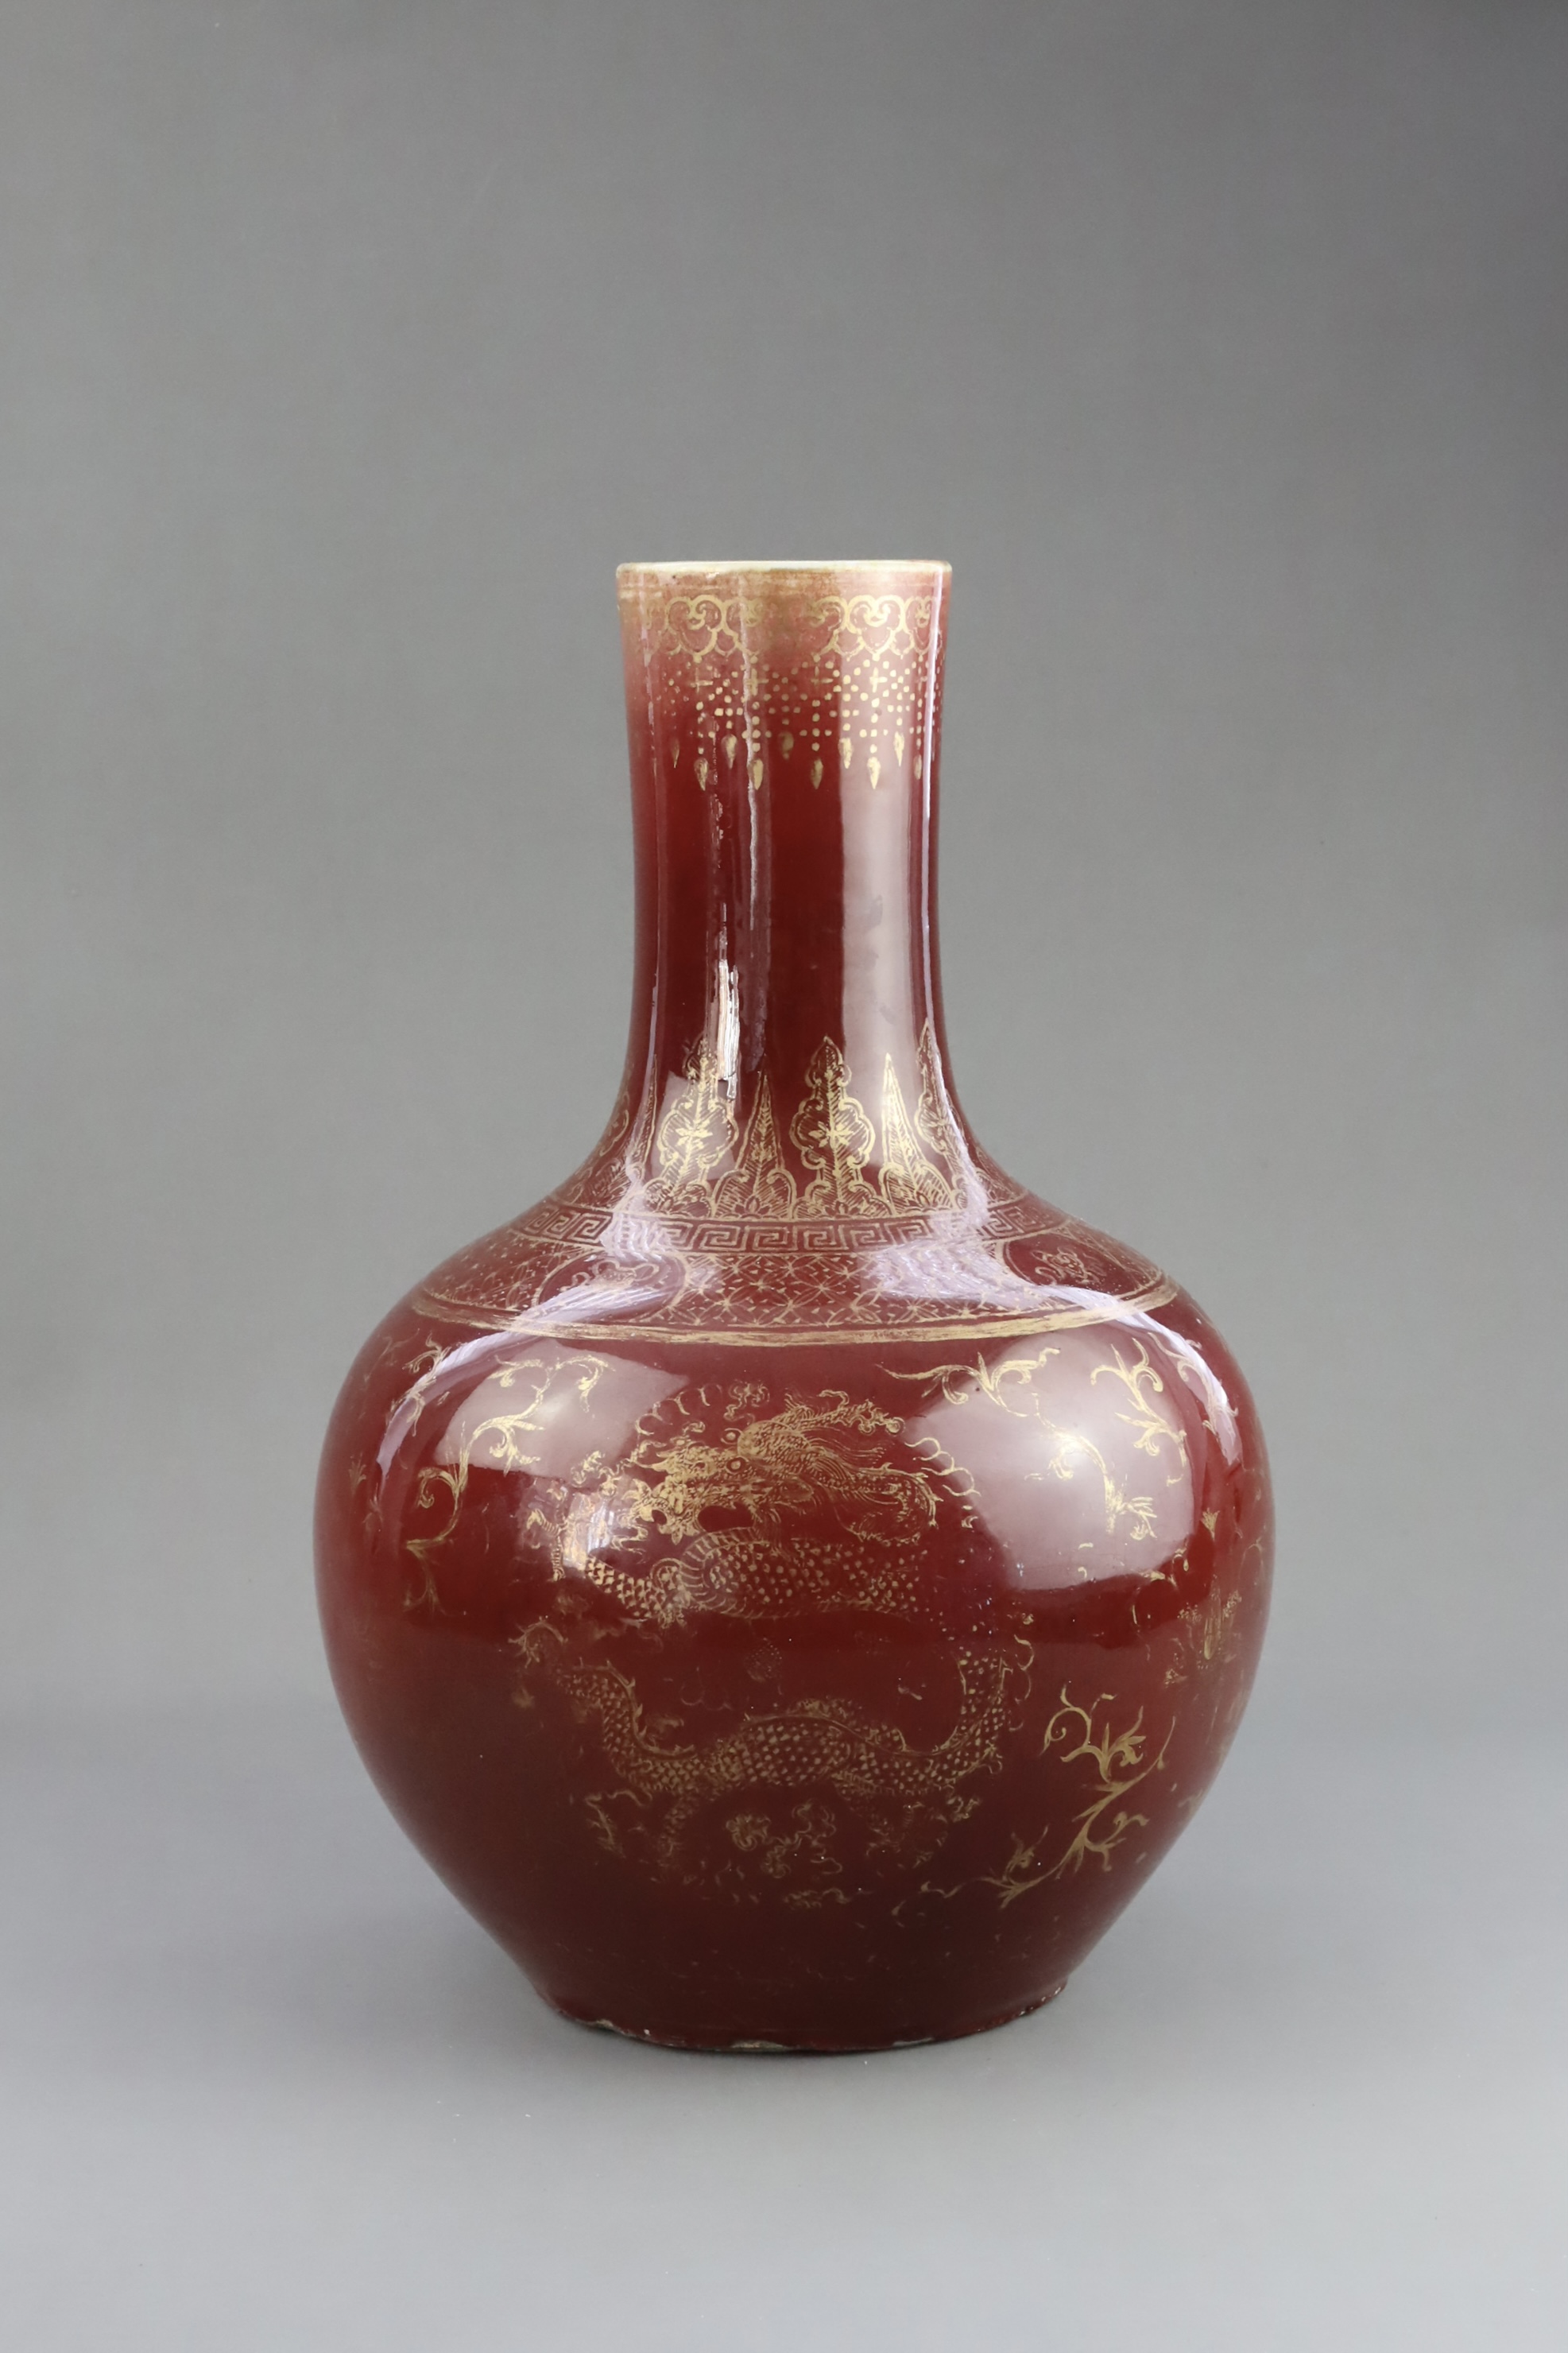 A  Red glazed Gilt Dragon Vase,late Qing dynasty - Image 7 of 9